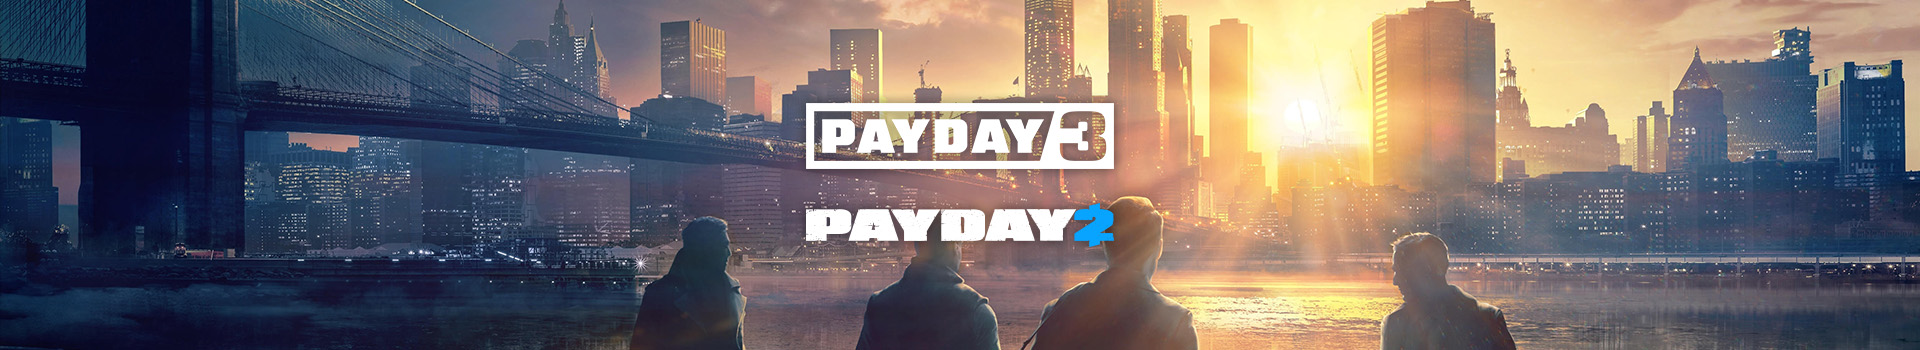 payday-neutral-banner-game-legends Image